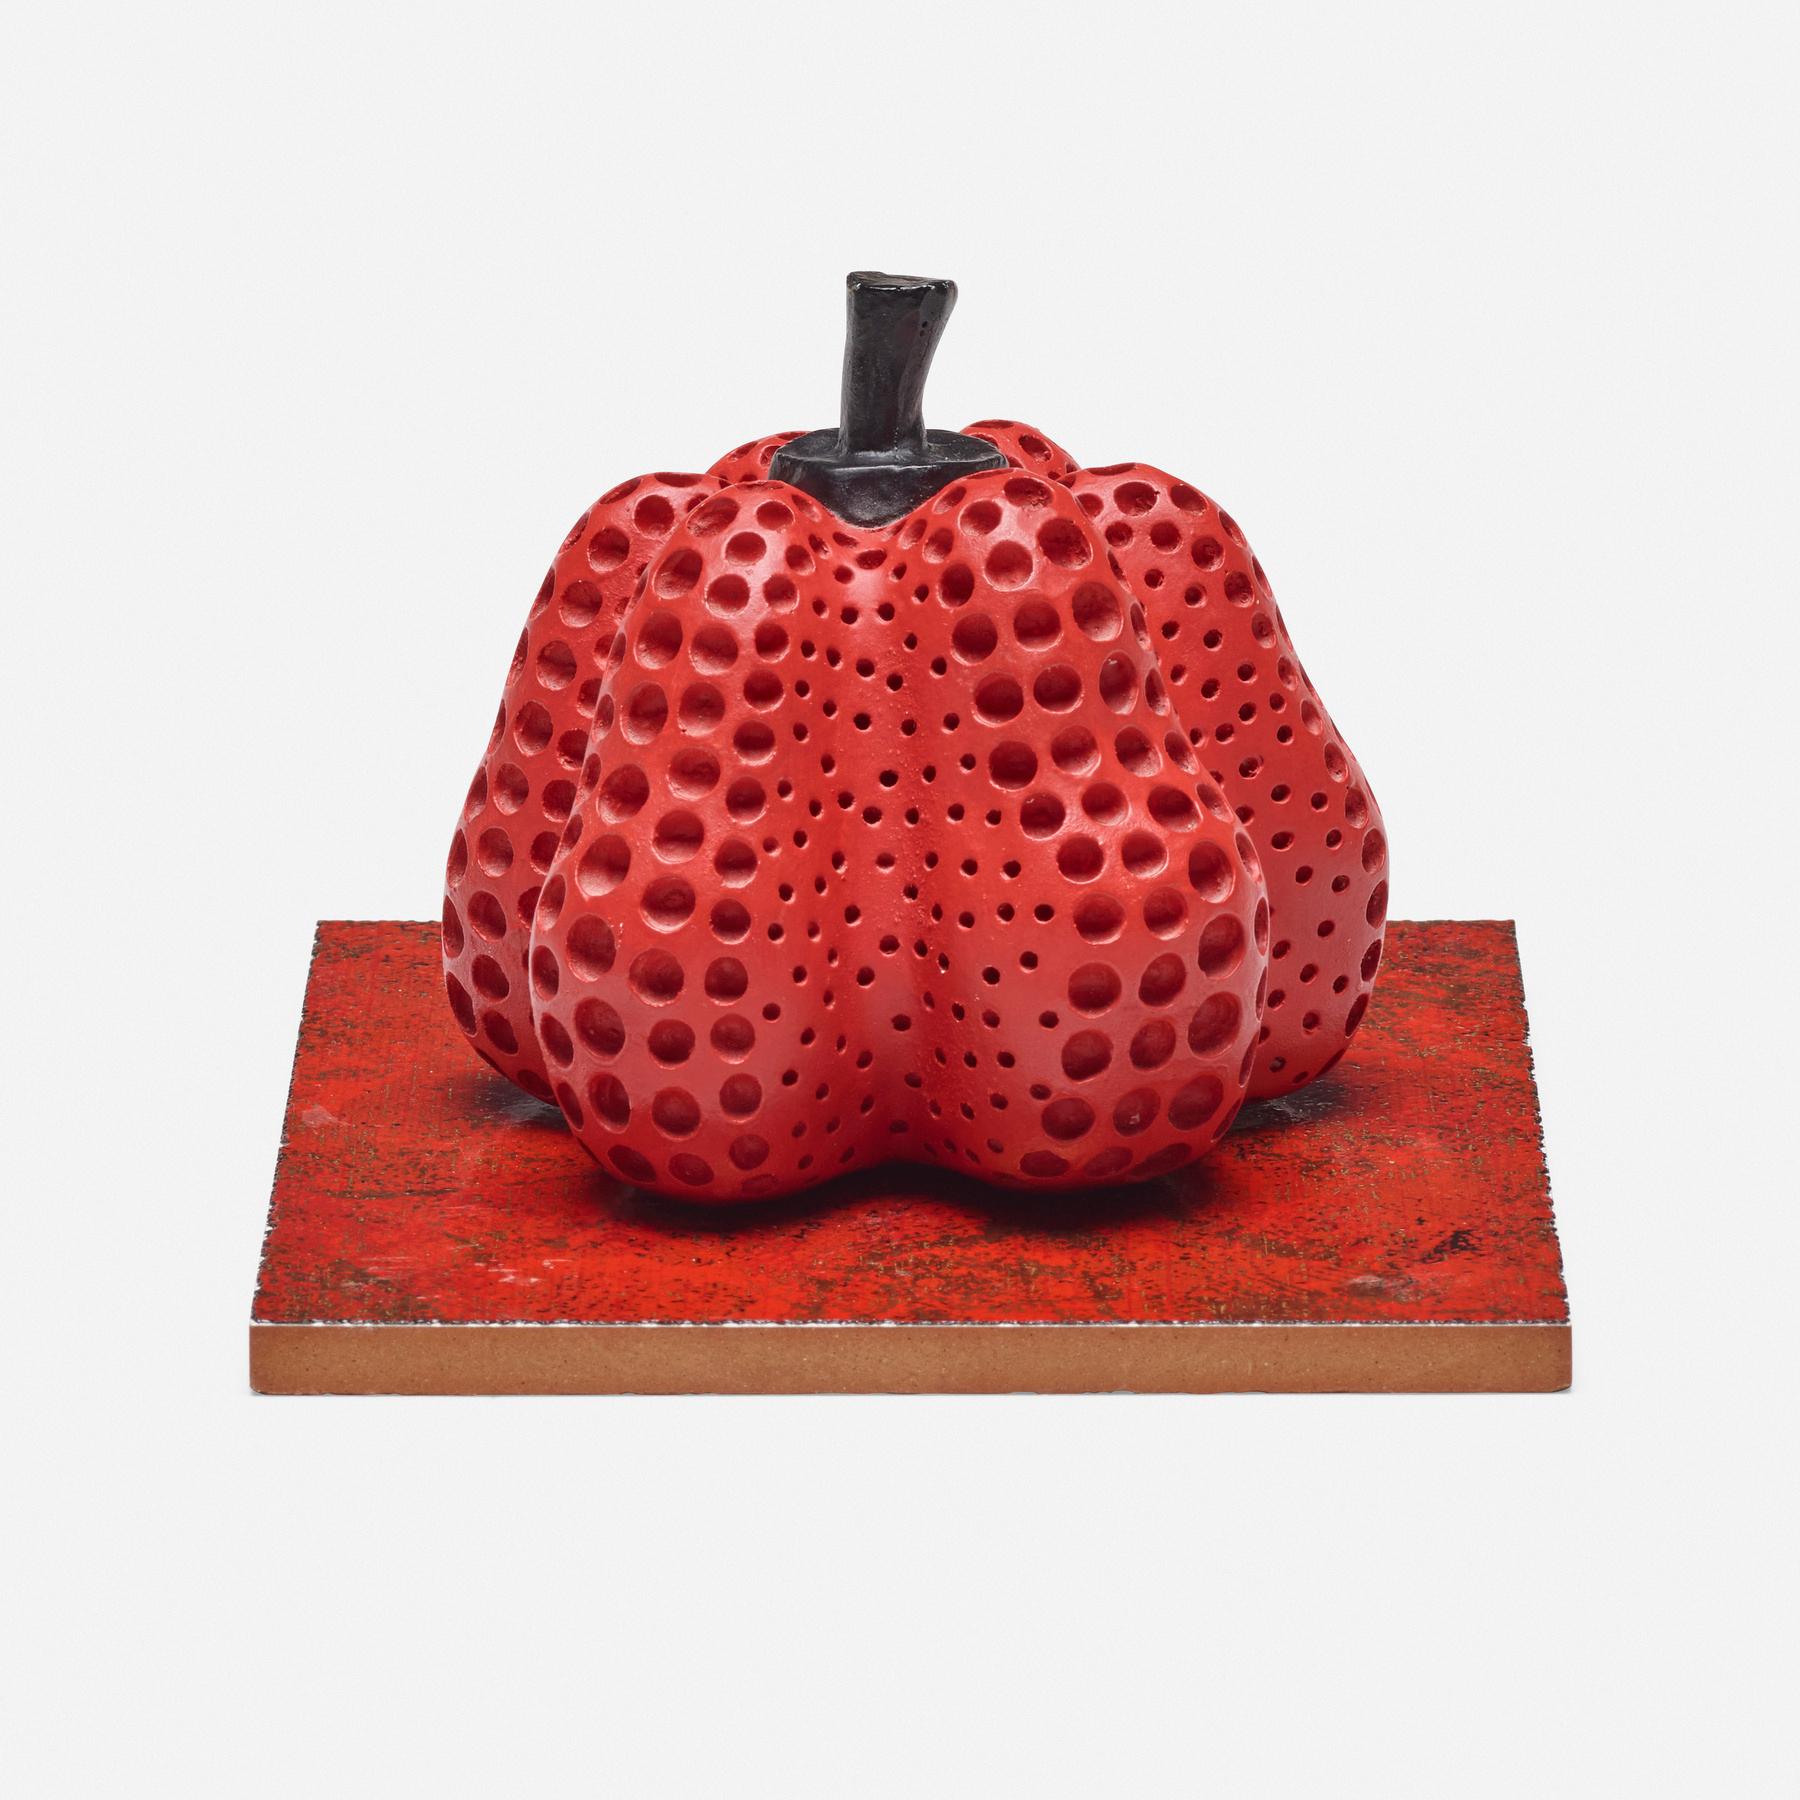 Original Limited Edition 7/30 hand signed and numbered Pumpkin (Red) Sculpture